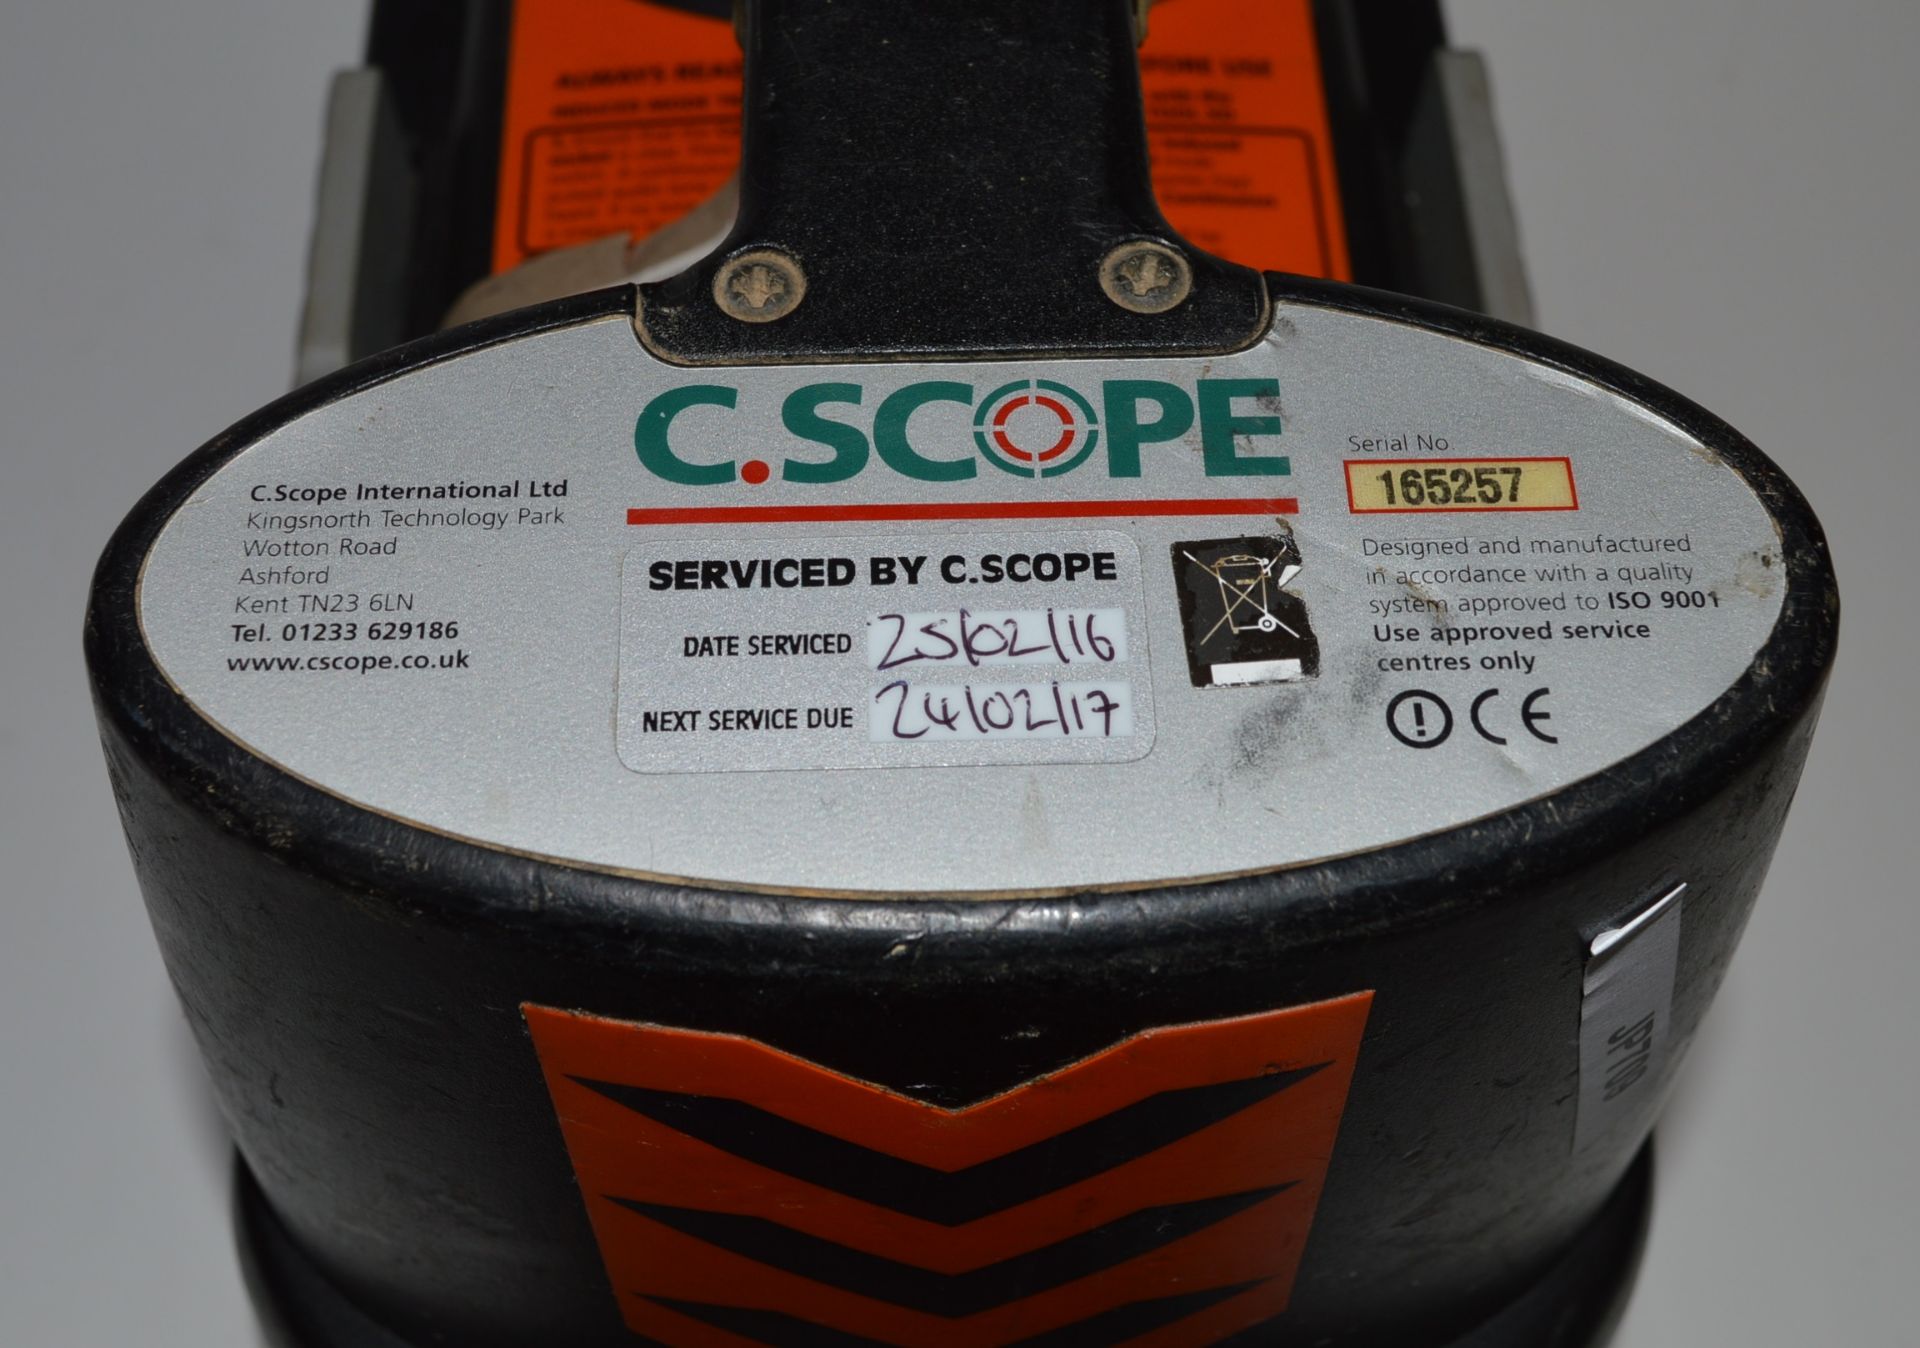 1 x C.Scope SGA Signal Generator - Suitable For CAT Cable Avoidance Tool - CL007 - Ref JP709 - - Image 4 of 7